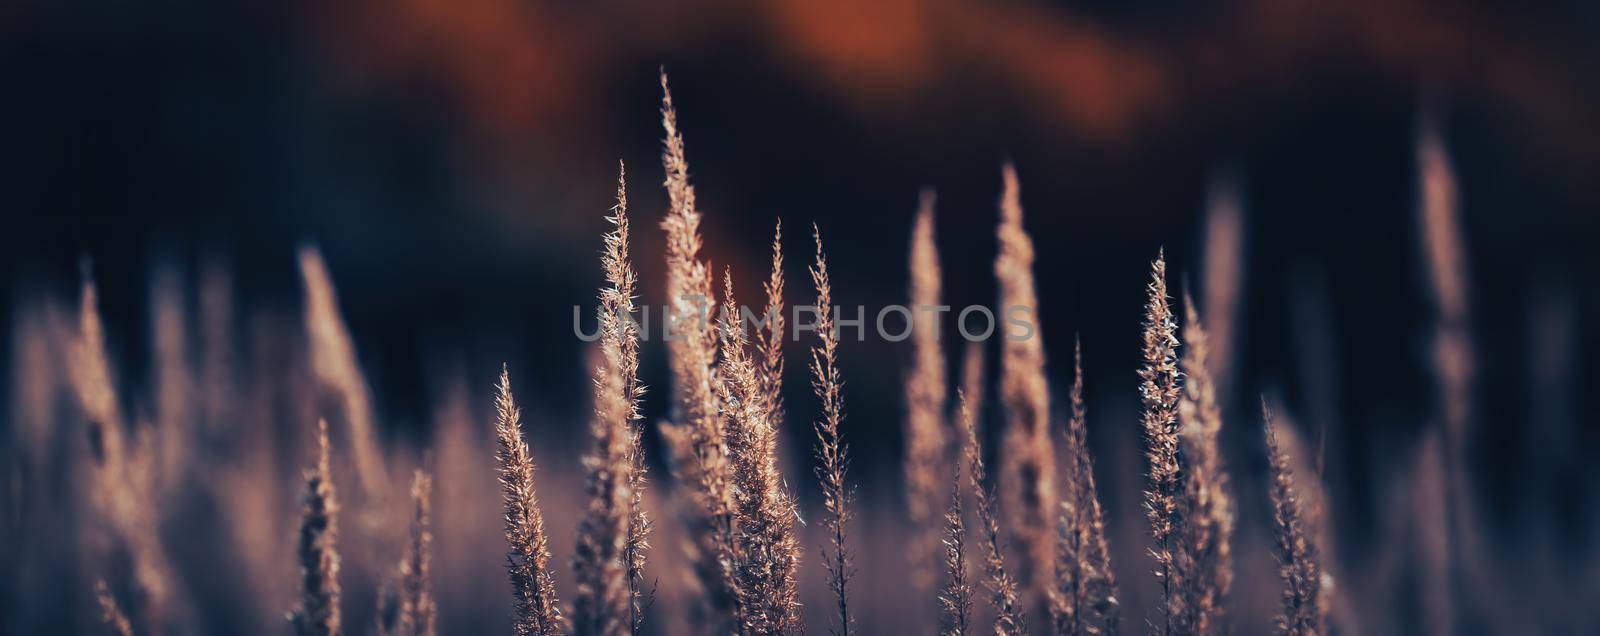 Autumn landscape. Field with dry autumn grass. Pampas grass outdoor in dramatic vintage colors